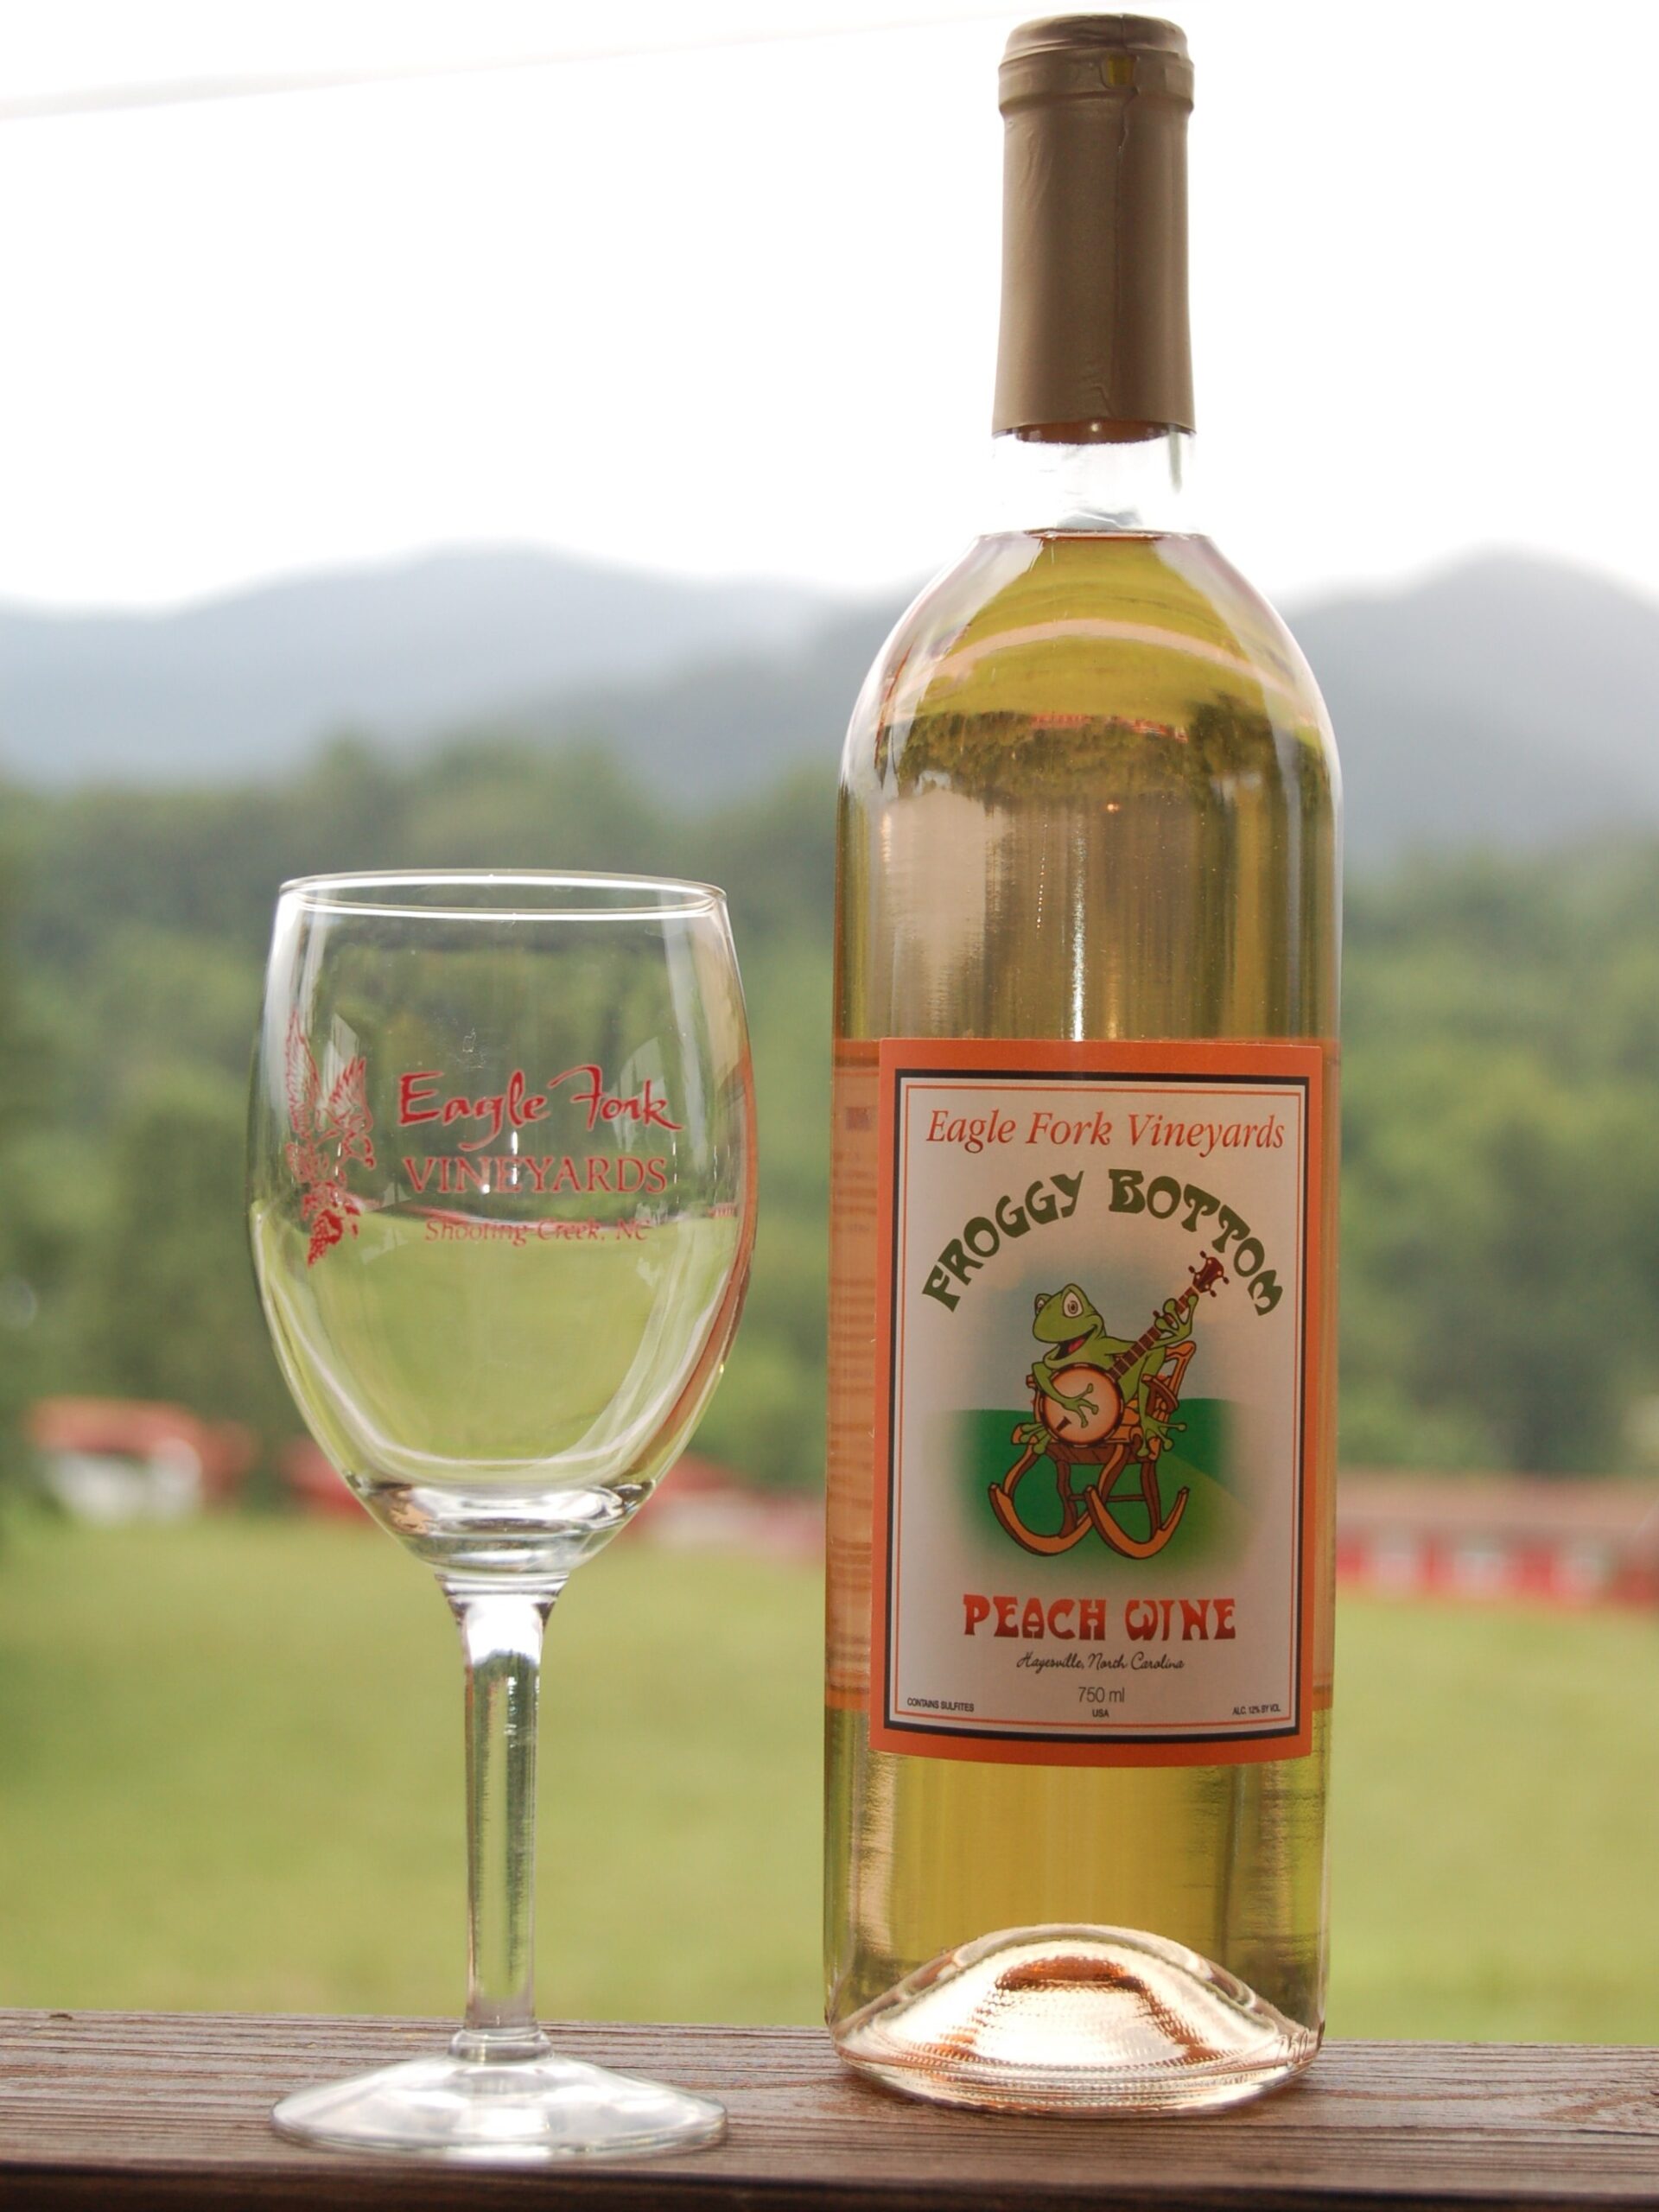 Experience the delight of the wonderful fresh aroma and delicious taste of Georgia grown peaches in this new addition to our wine selections.